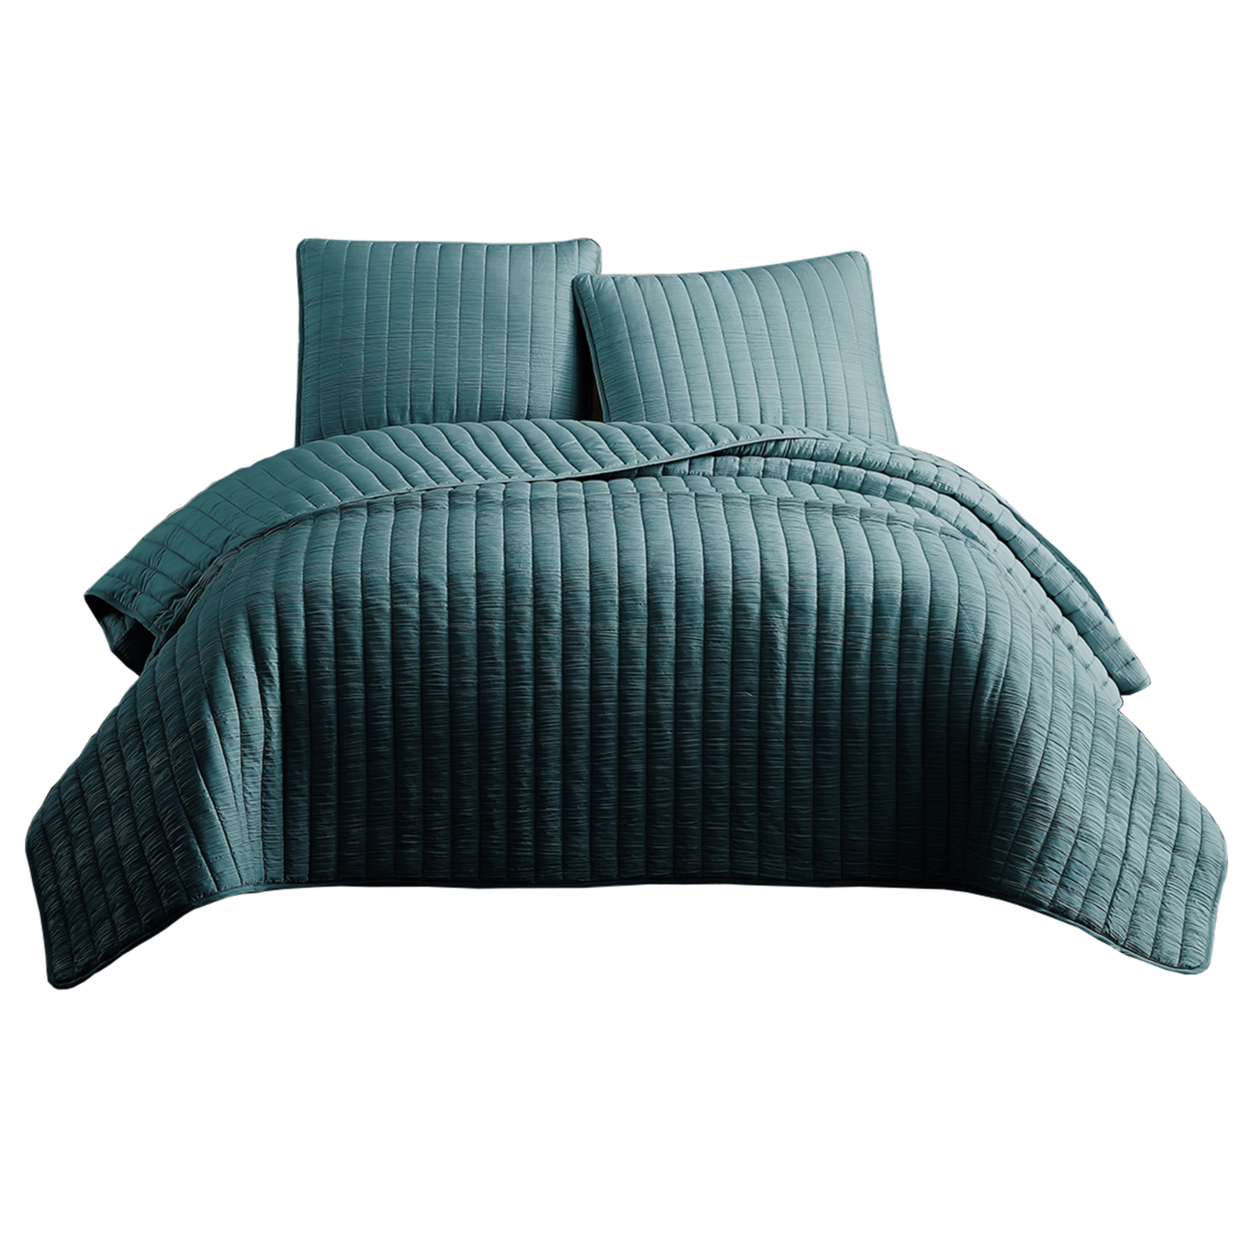 3 Piece Crinkle King Coverlet Set With Vertical Stitching, Turquoise Blue- Saltoro Sherpi